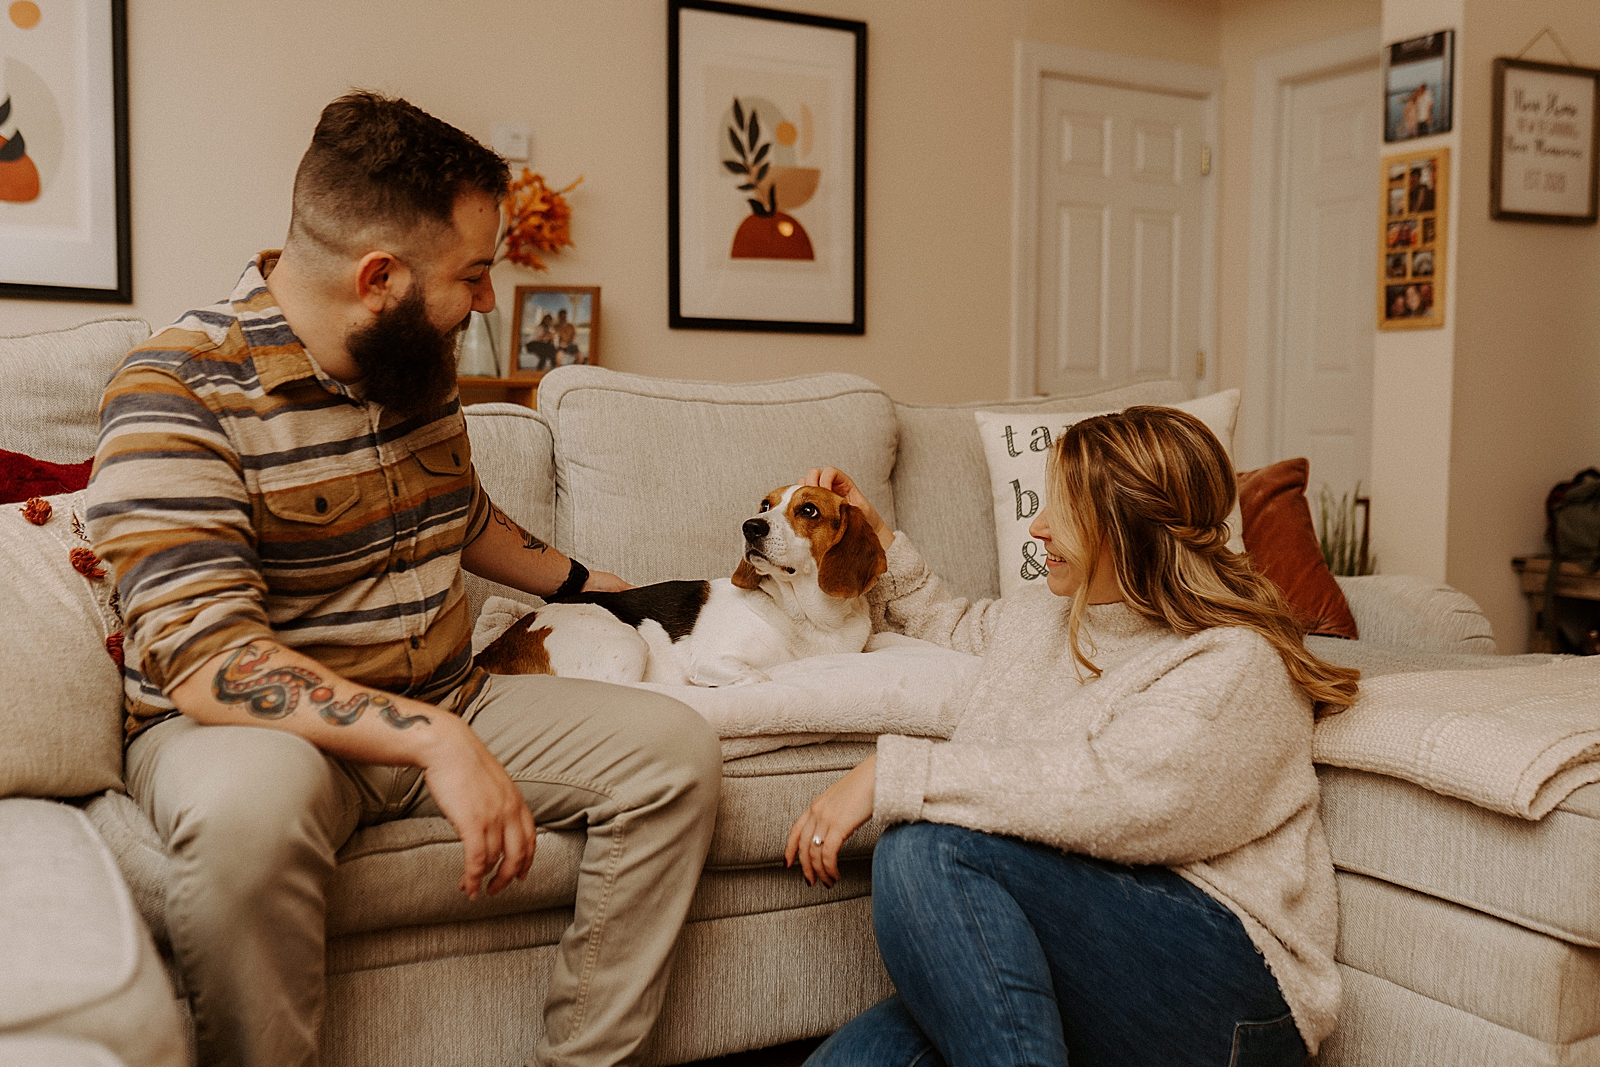 Couple on living room couch petting dog